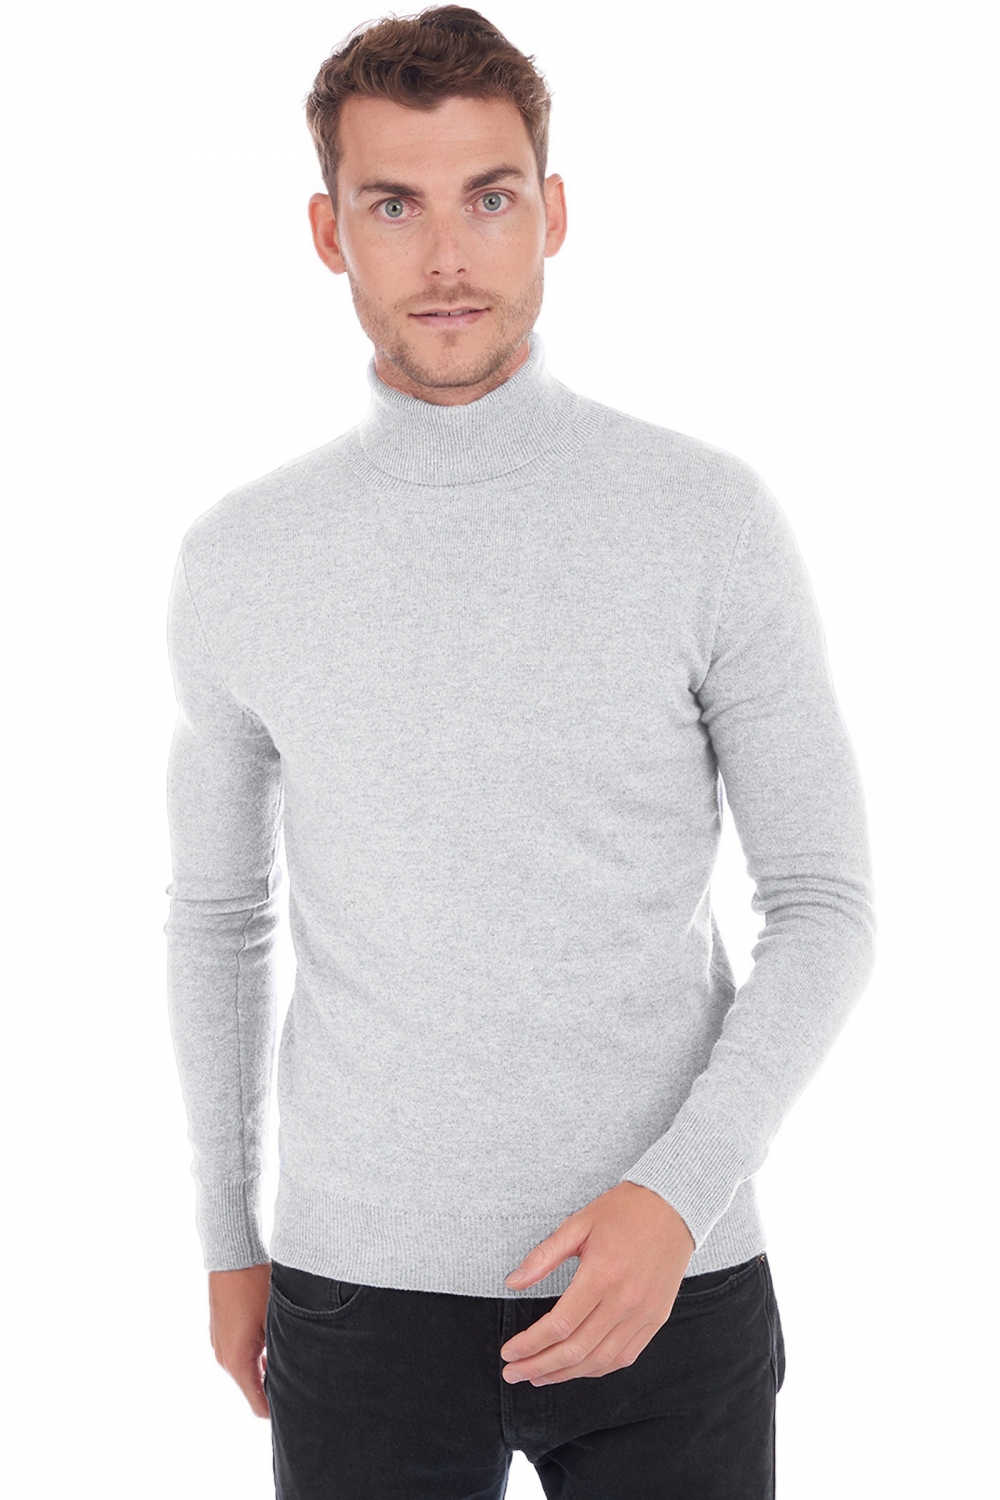 Cashmere men basic sweaters at low prices tarry first flannel l